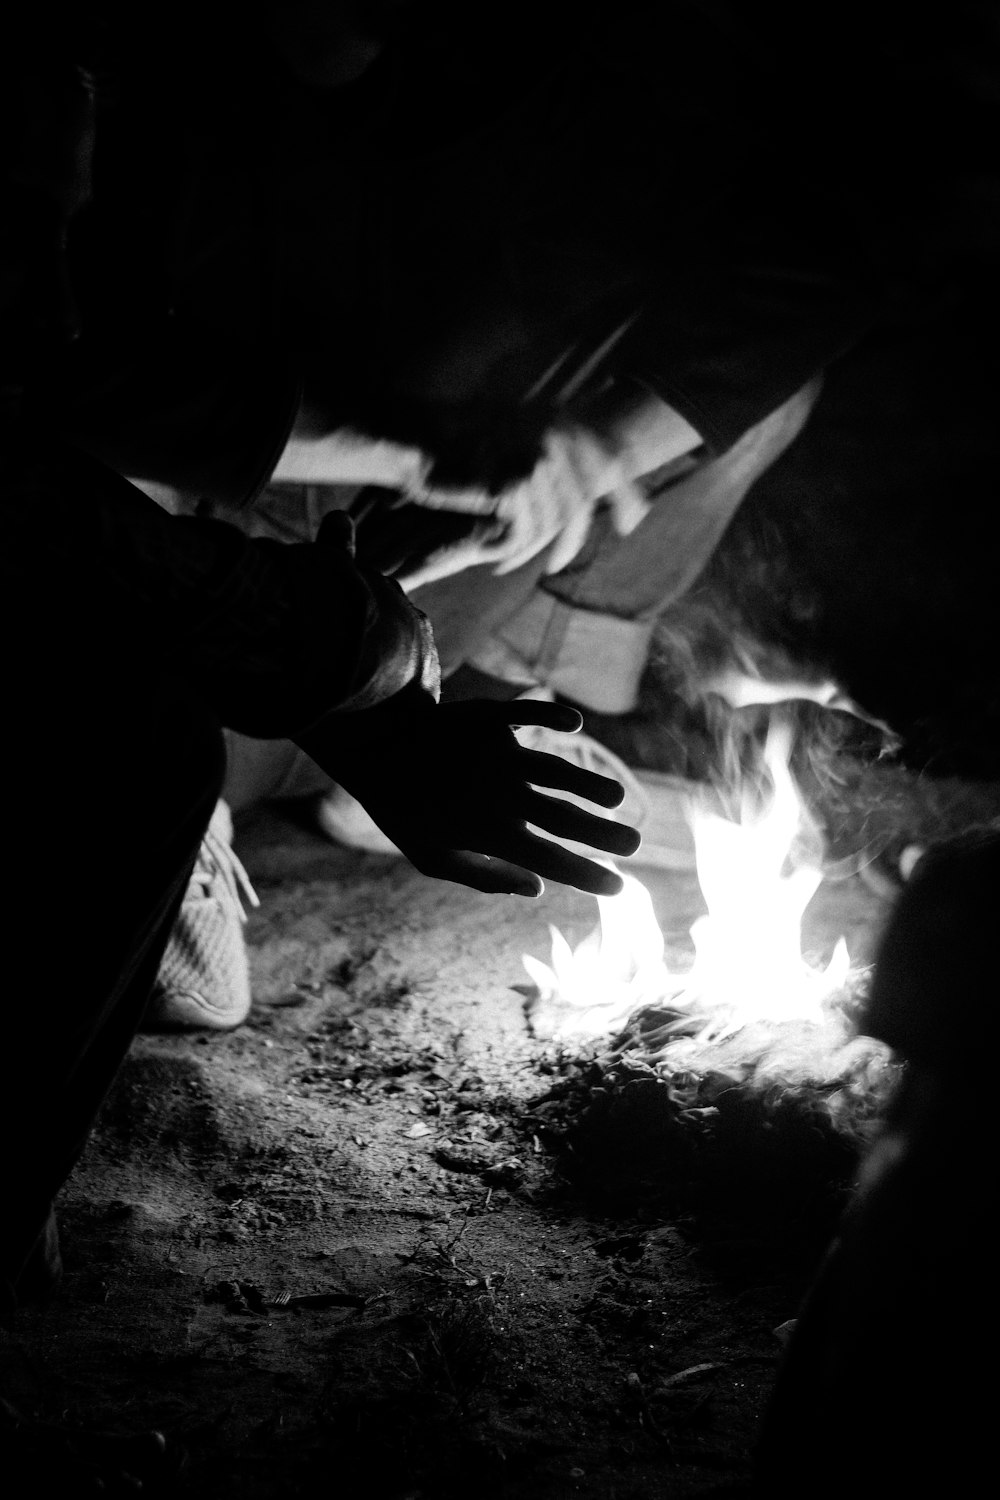 a black and white photo of a person reaching for something